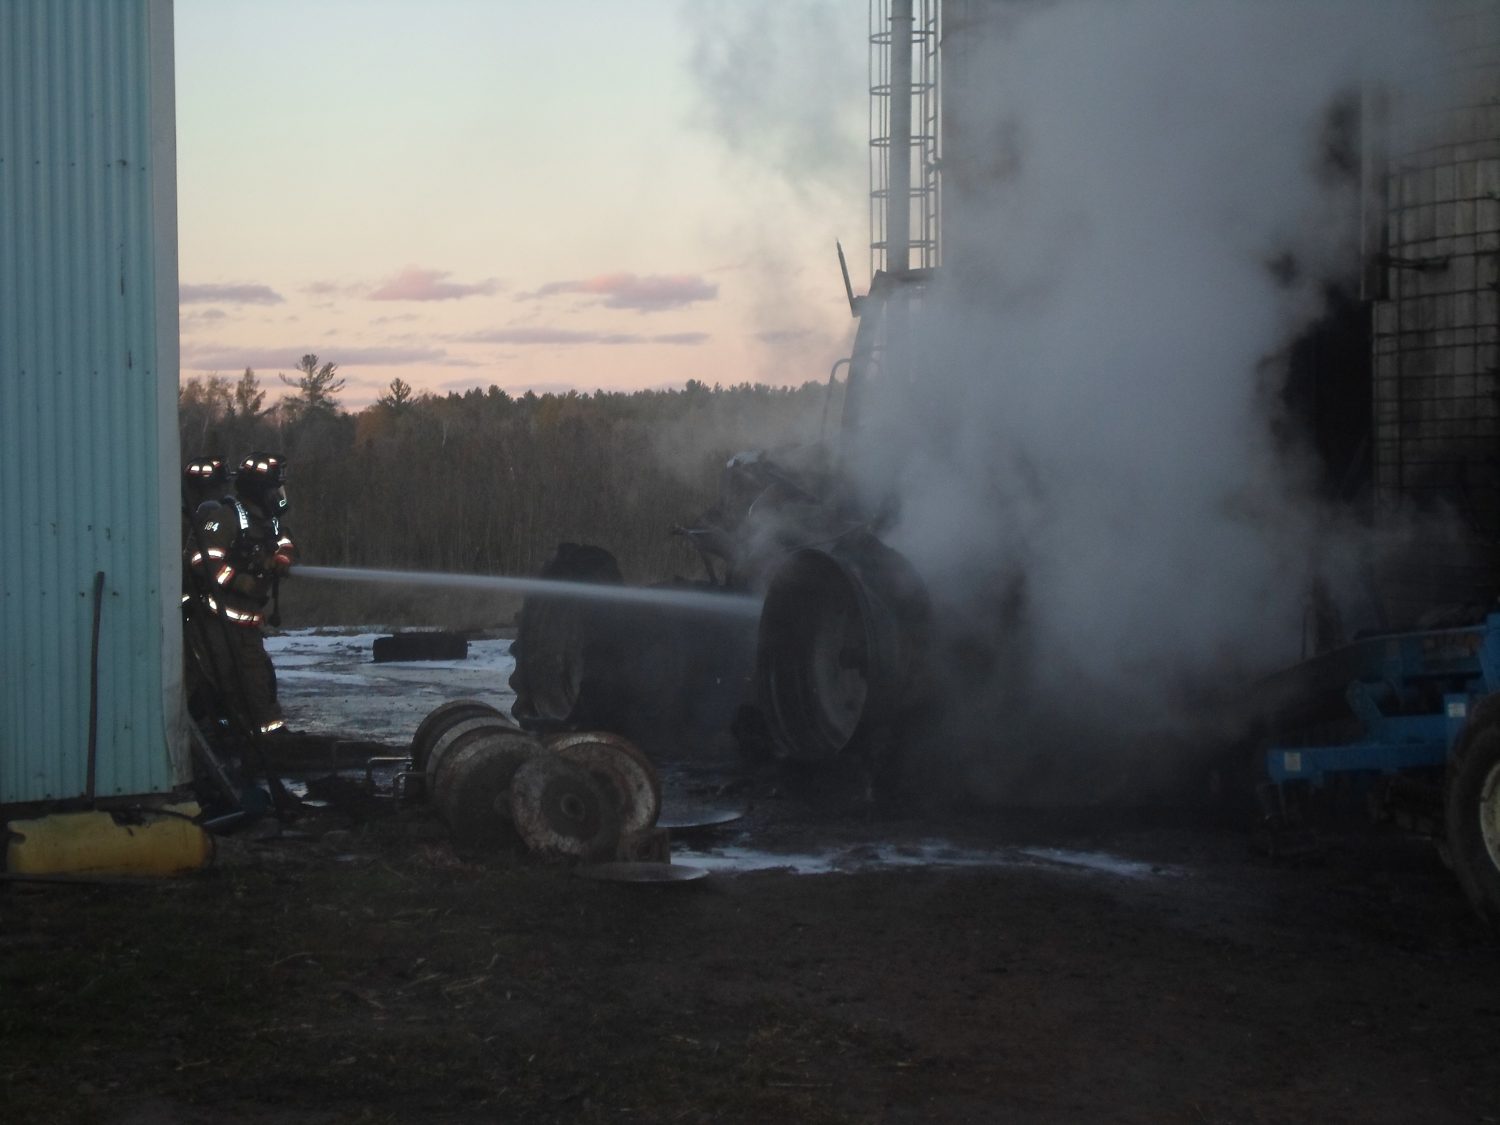 Tractor fire causes $275,ooo in damages